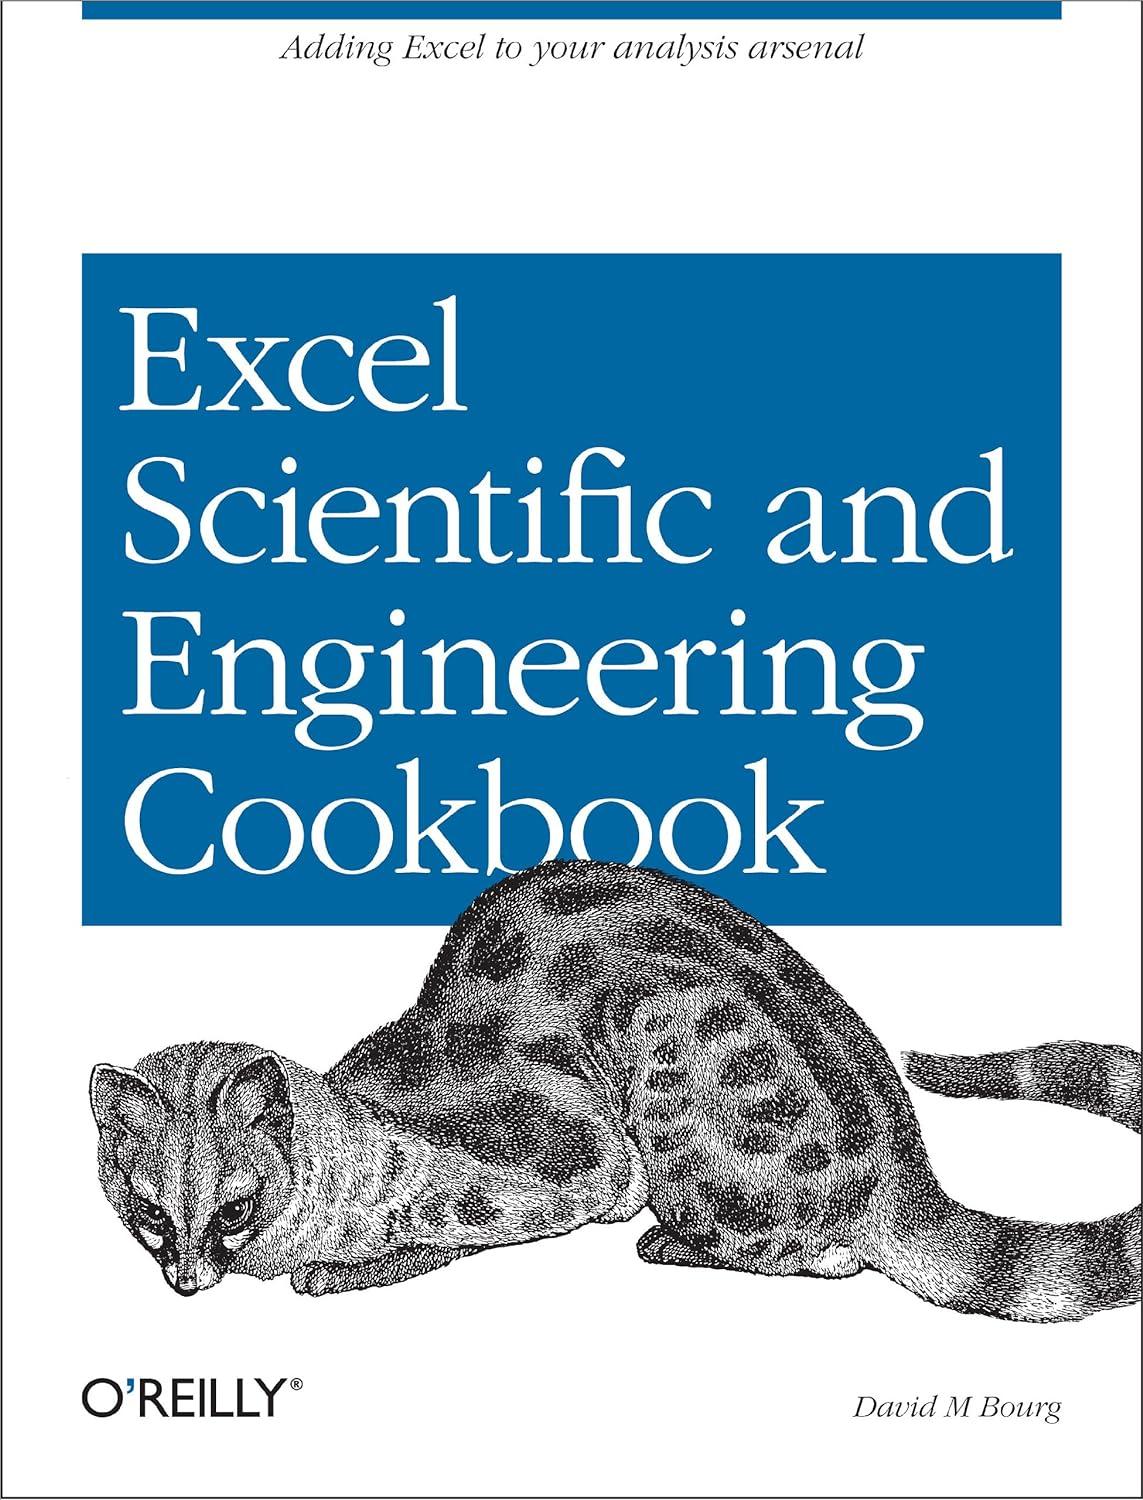 Excel Scientific And Engineering Cookbook Adding Excel To Your Analysis Arsenal